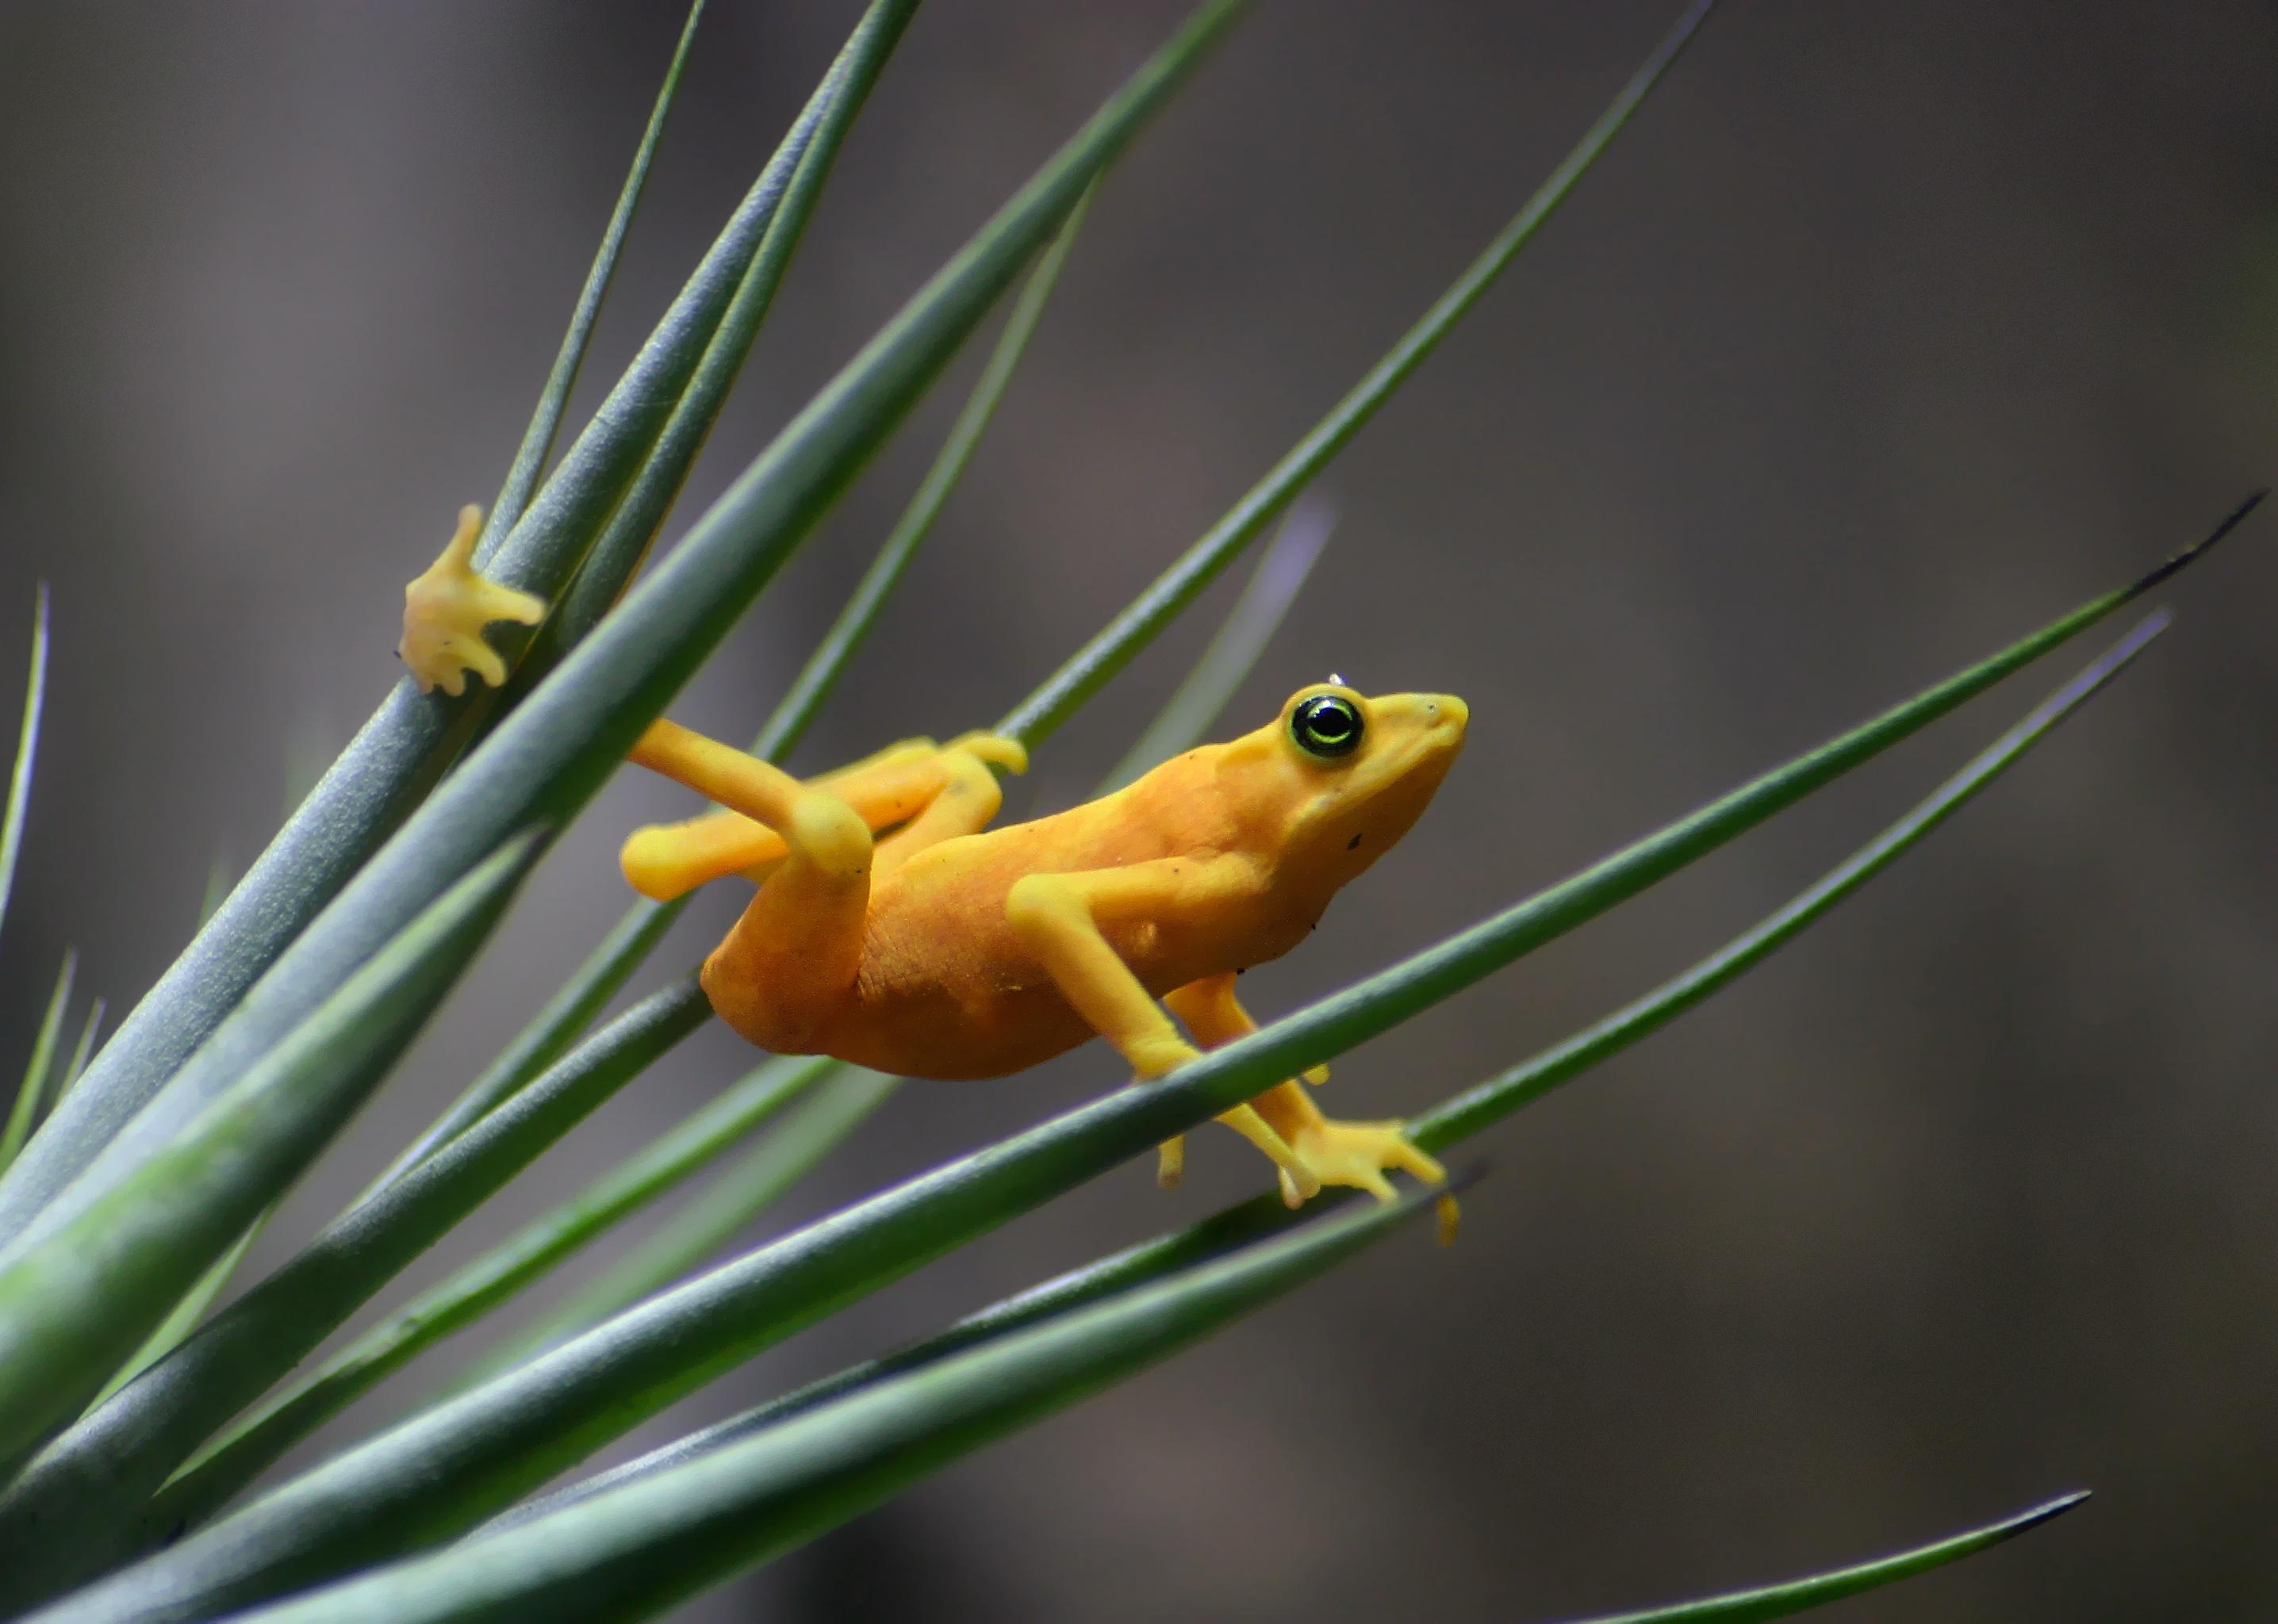 Panamanian Golden Frog on blades of grass.